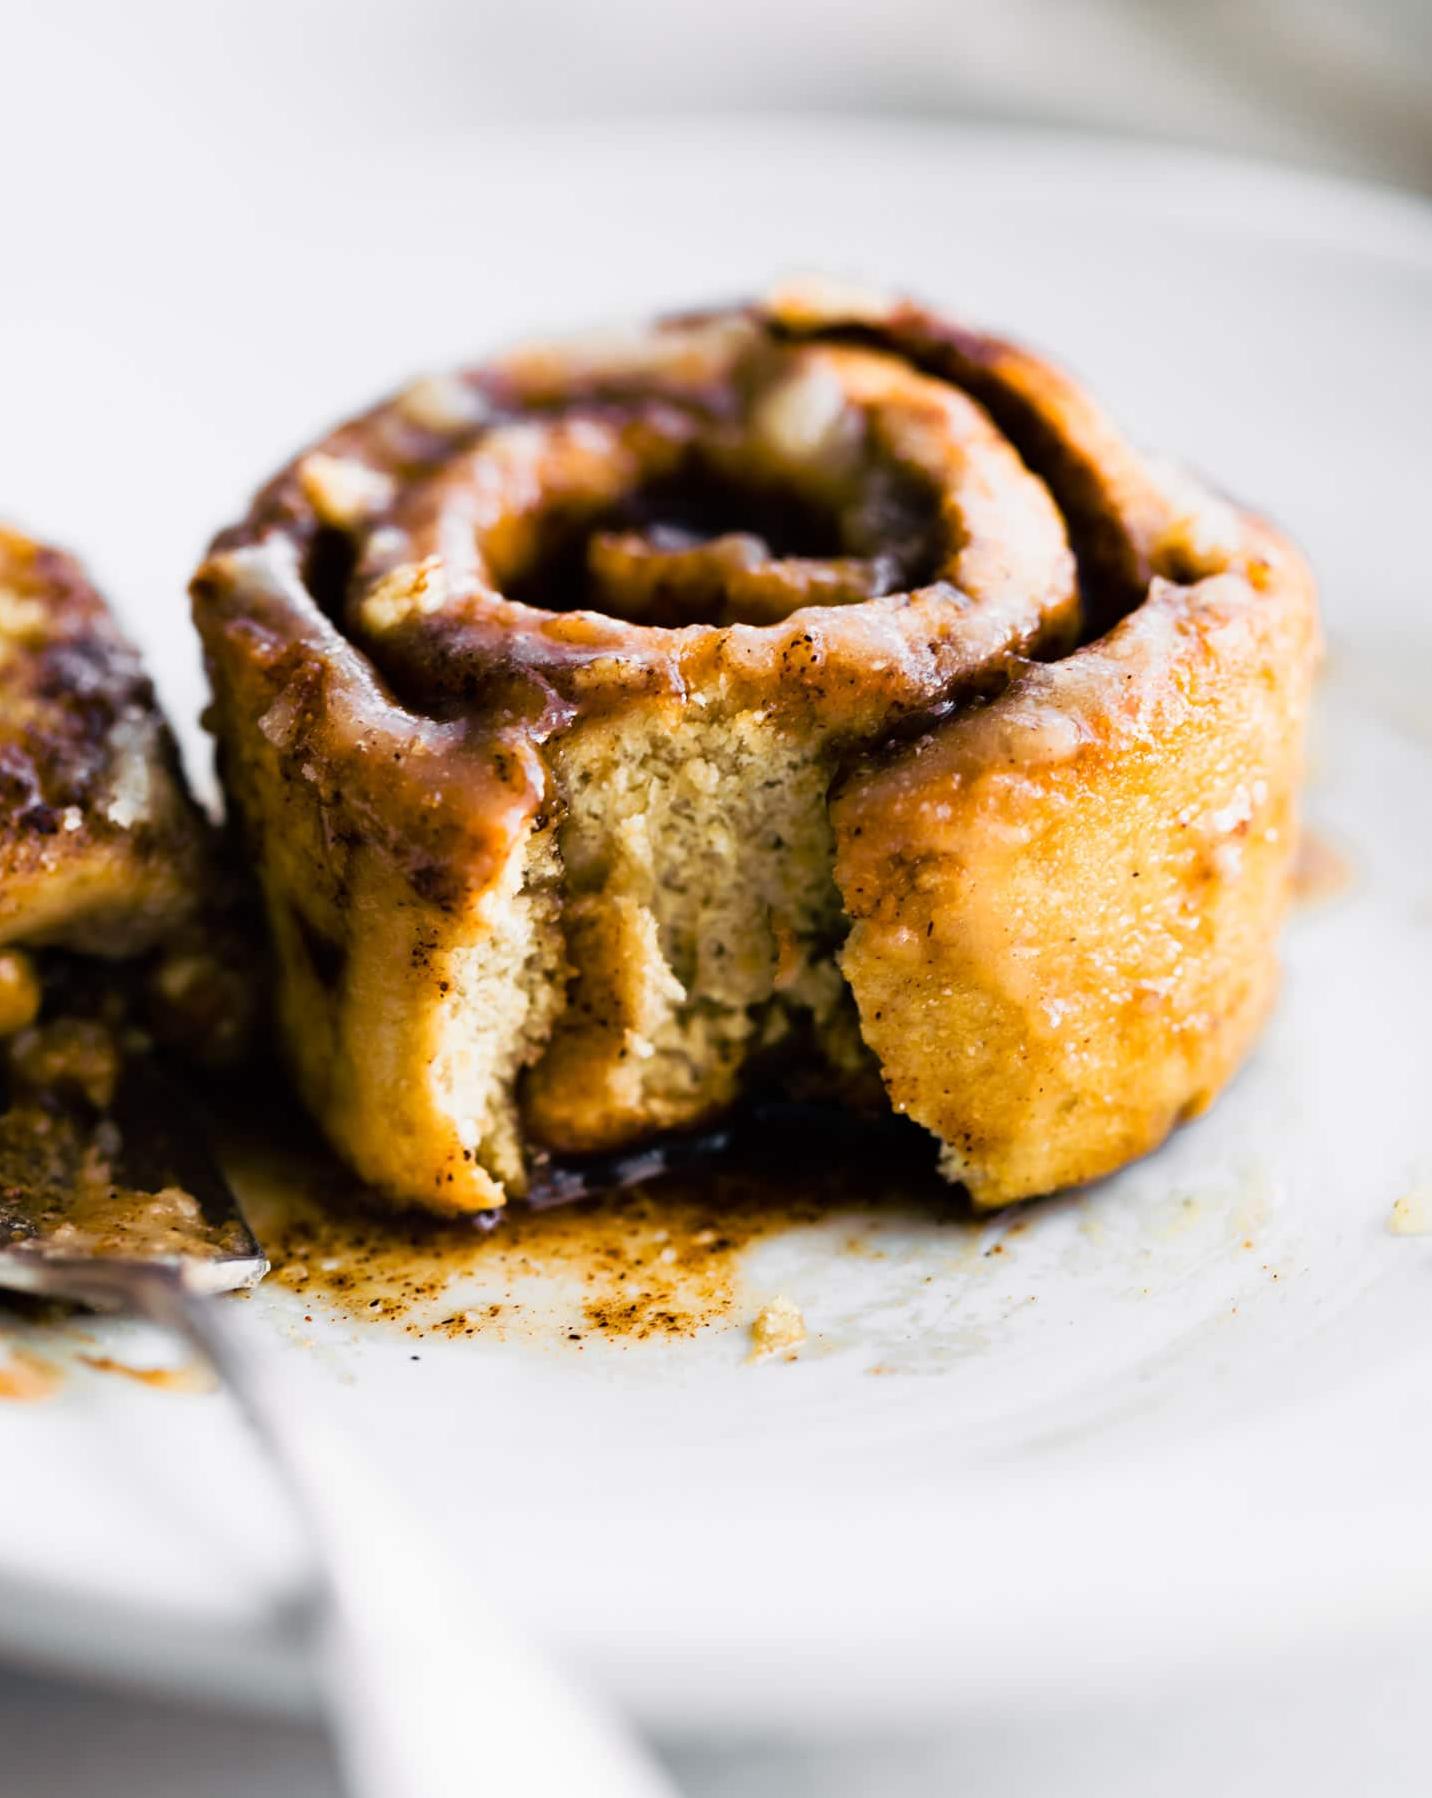  These cinnamon rolls are perfect for a cozy Sunday morning breakfast with loved ones.